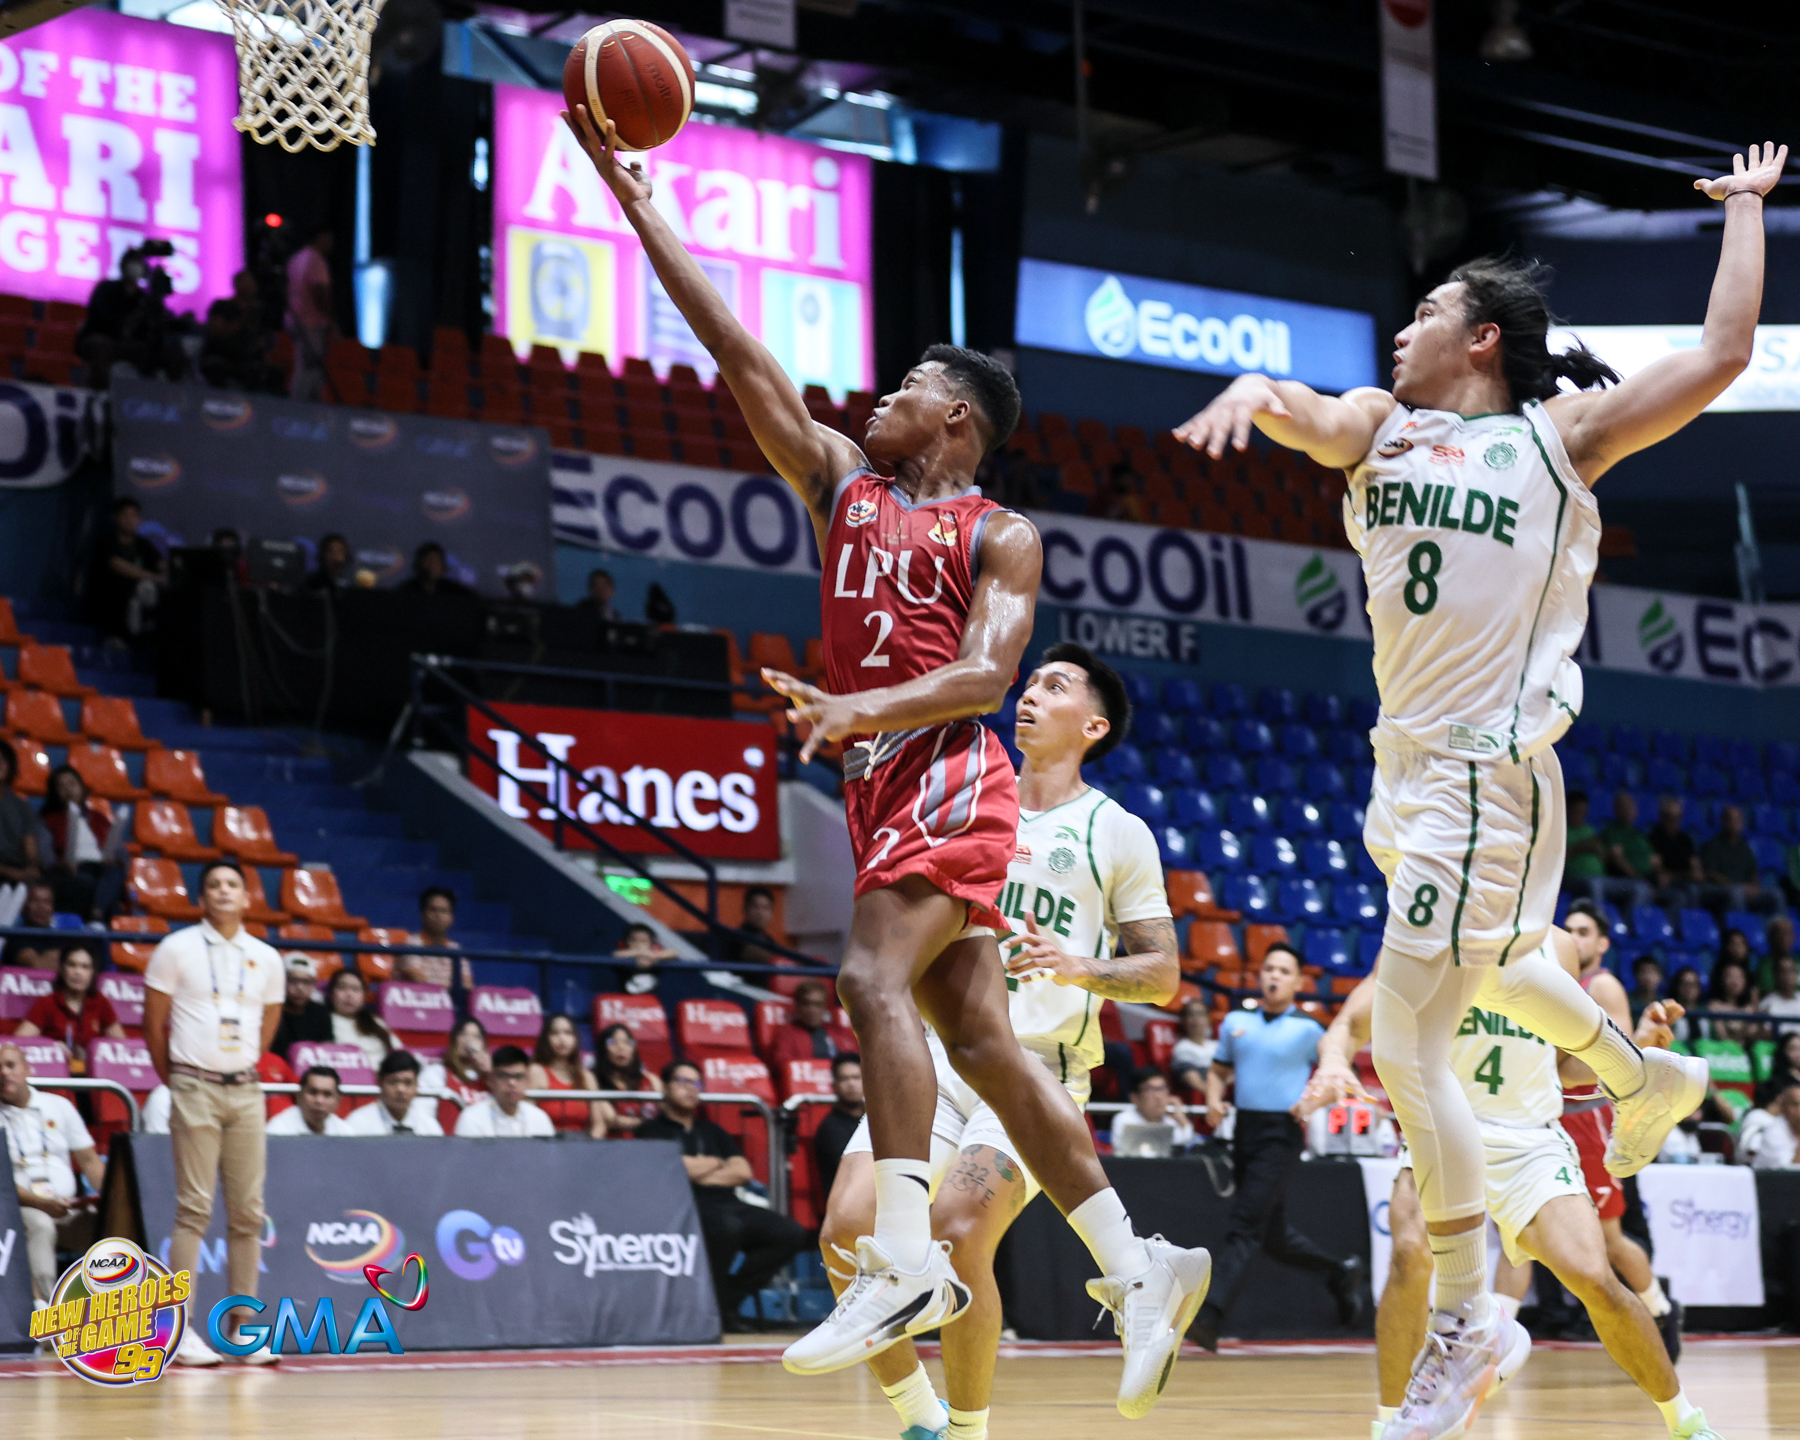 Lyceum's Enoch Valdez flies past College of St. Benilde's Migs Oczon and Miggy Corteza for the layup. –NCAA Photo